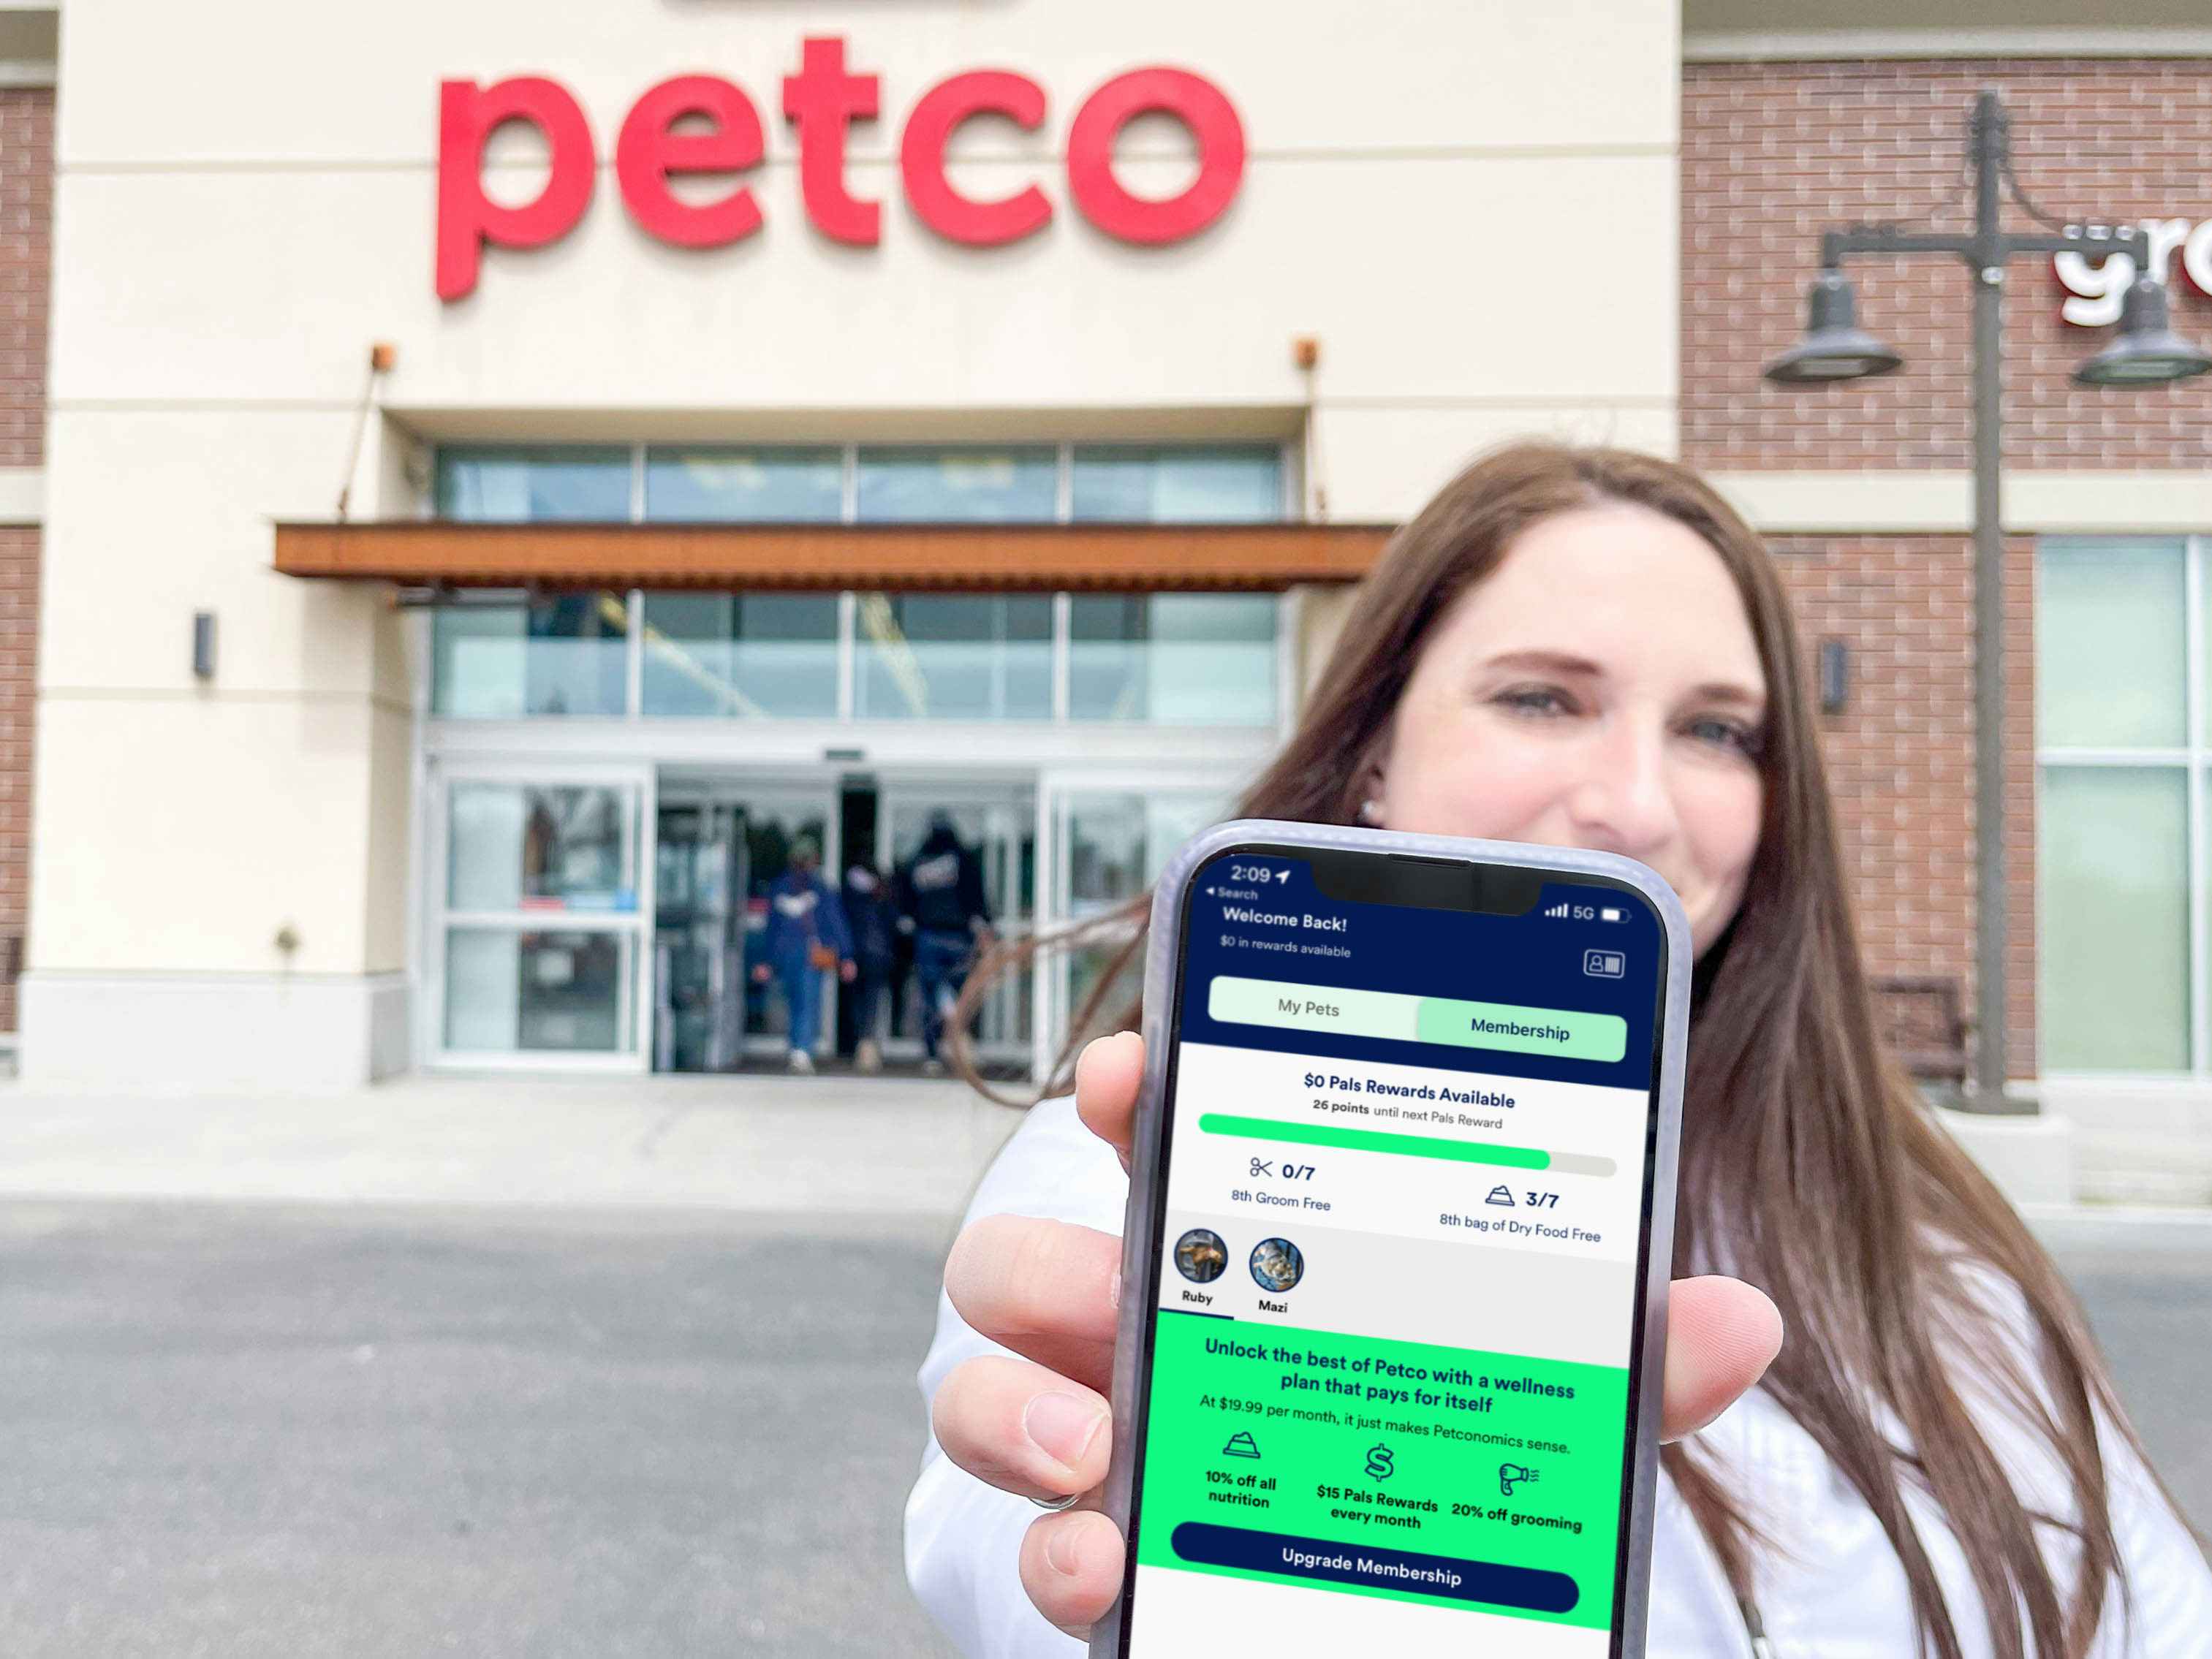 a woman holding a cellphone with pals rewards on screen standing in front of a petco 